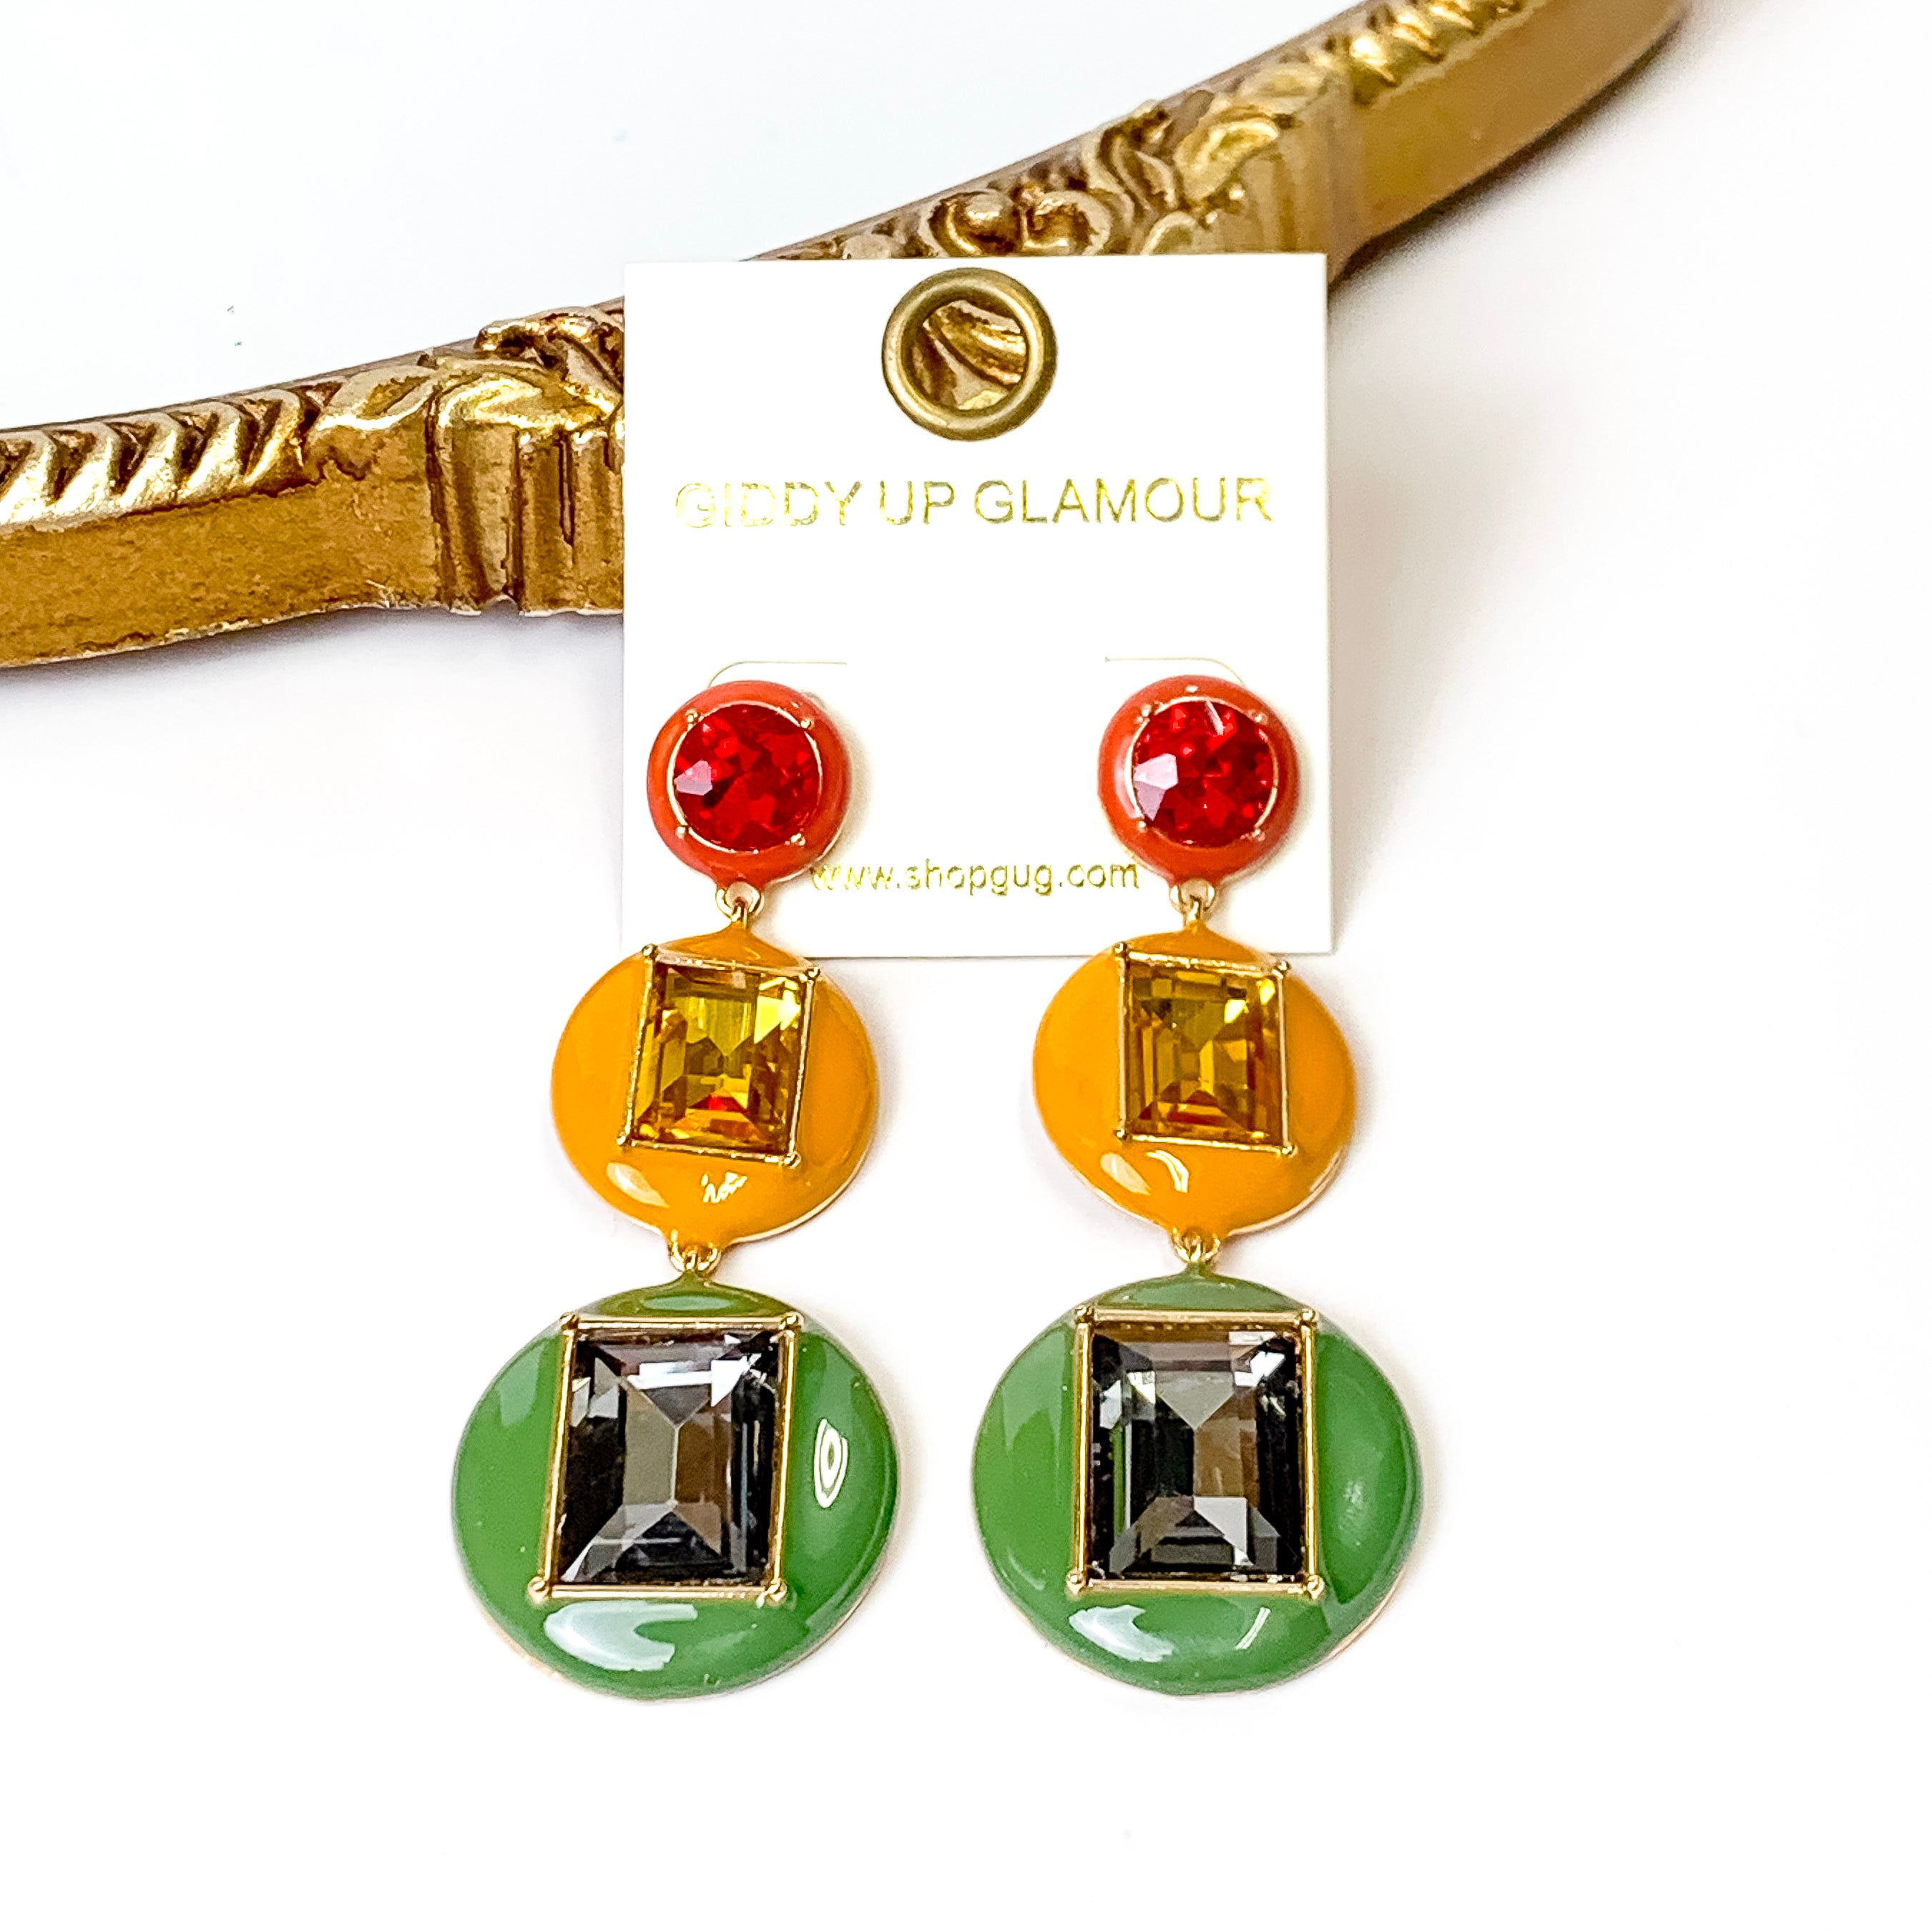 3 Tier Multicolor Enamel Framed Stone Drop Earrings in Red/Yellow/Green - Giddy Up Glamour Boutique